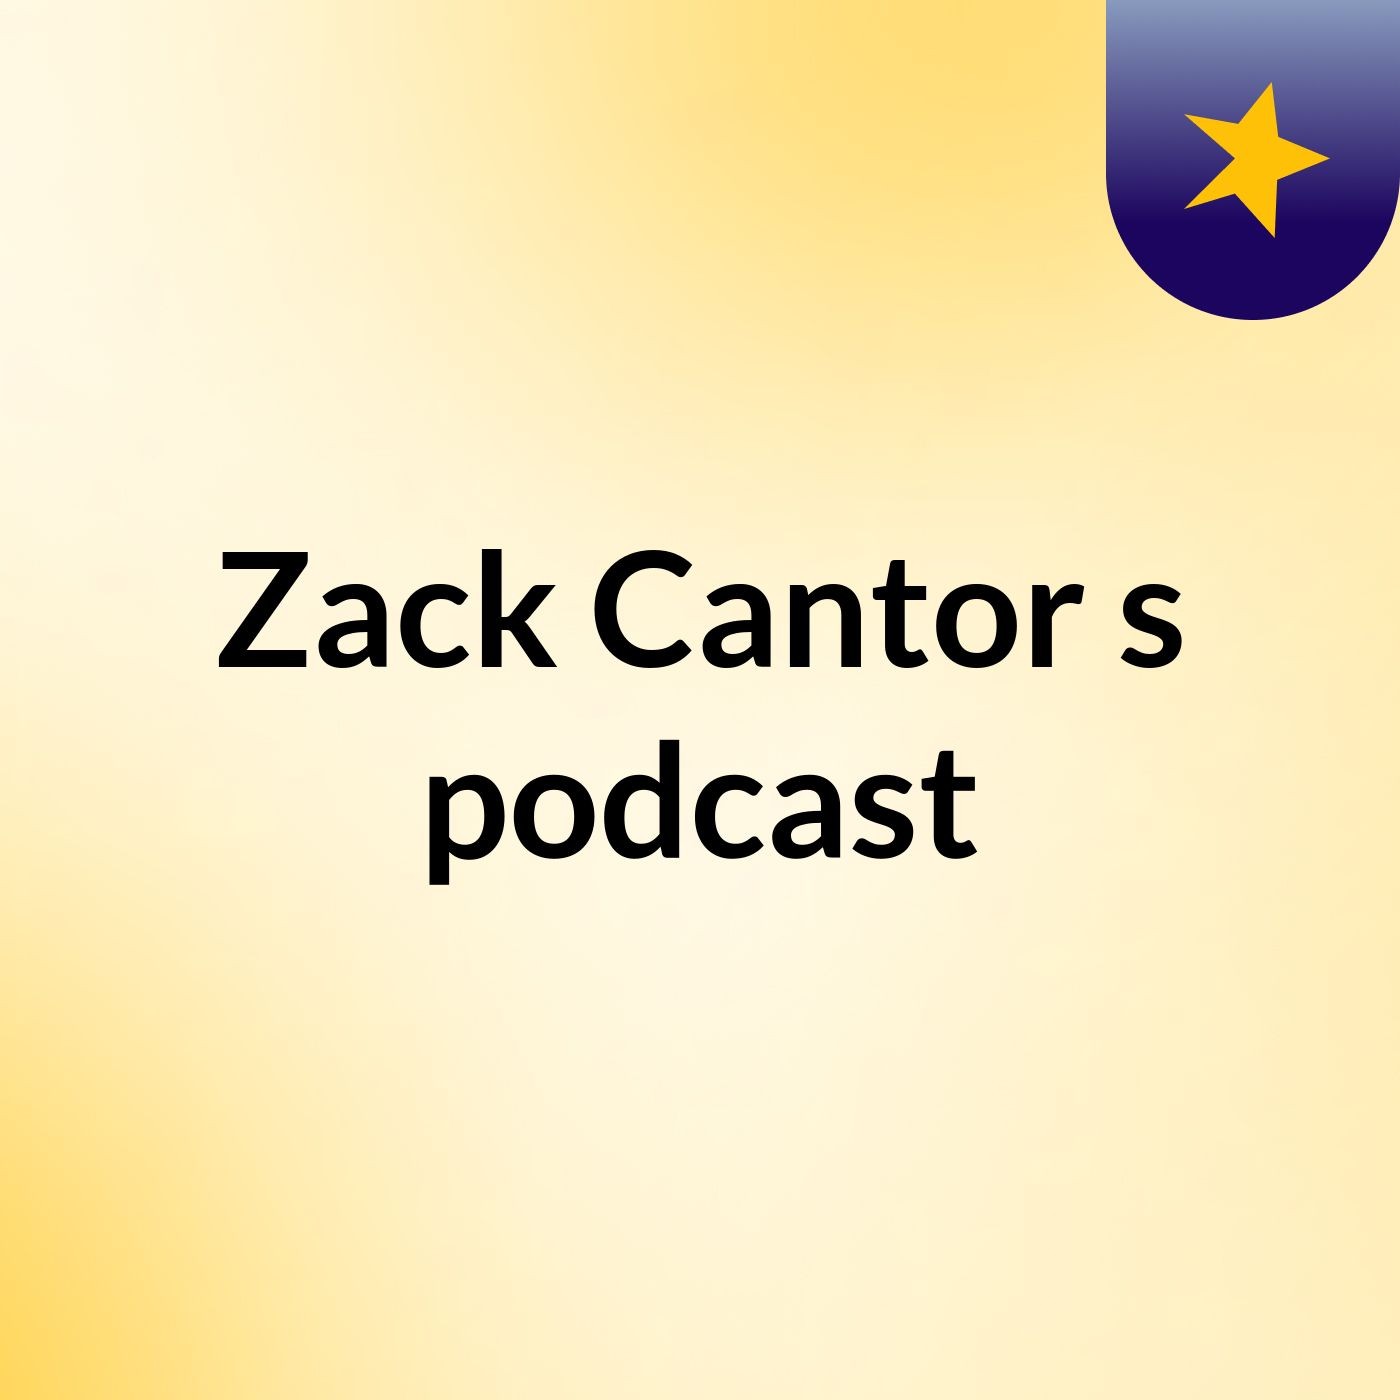 Episode 2 - Zack Cantor's podcast